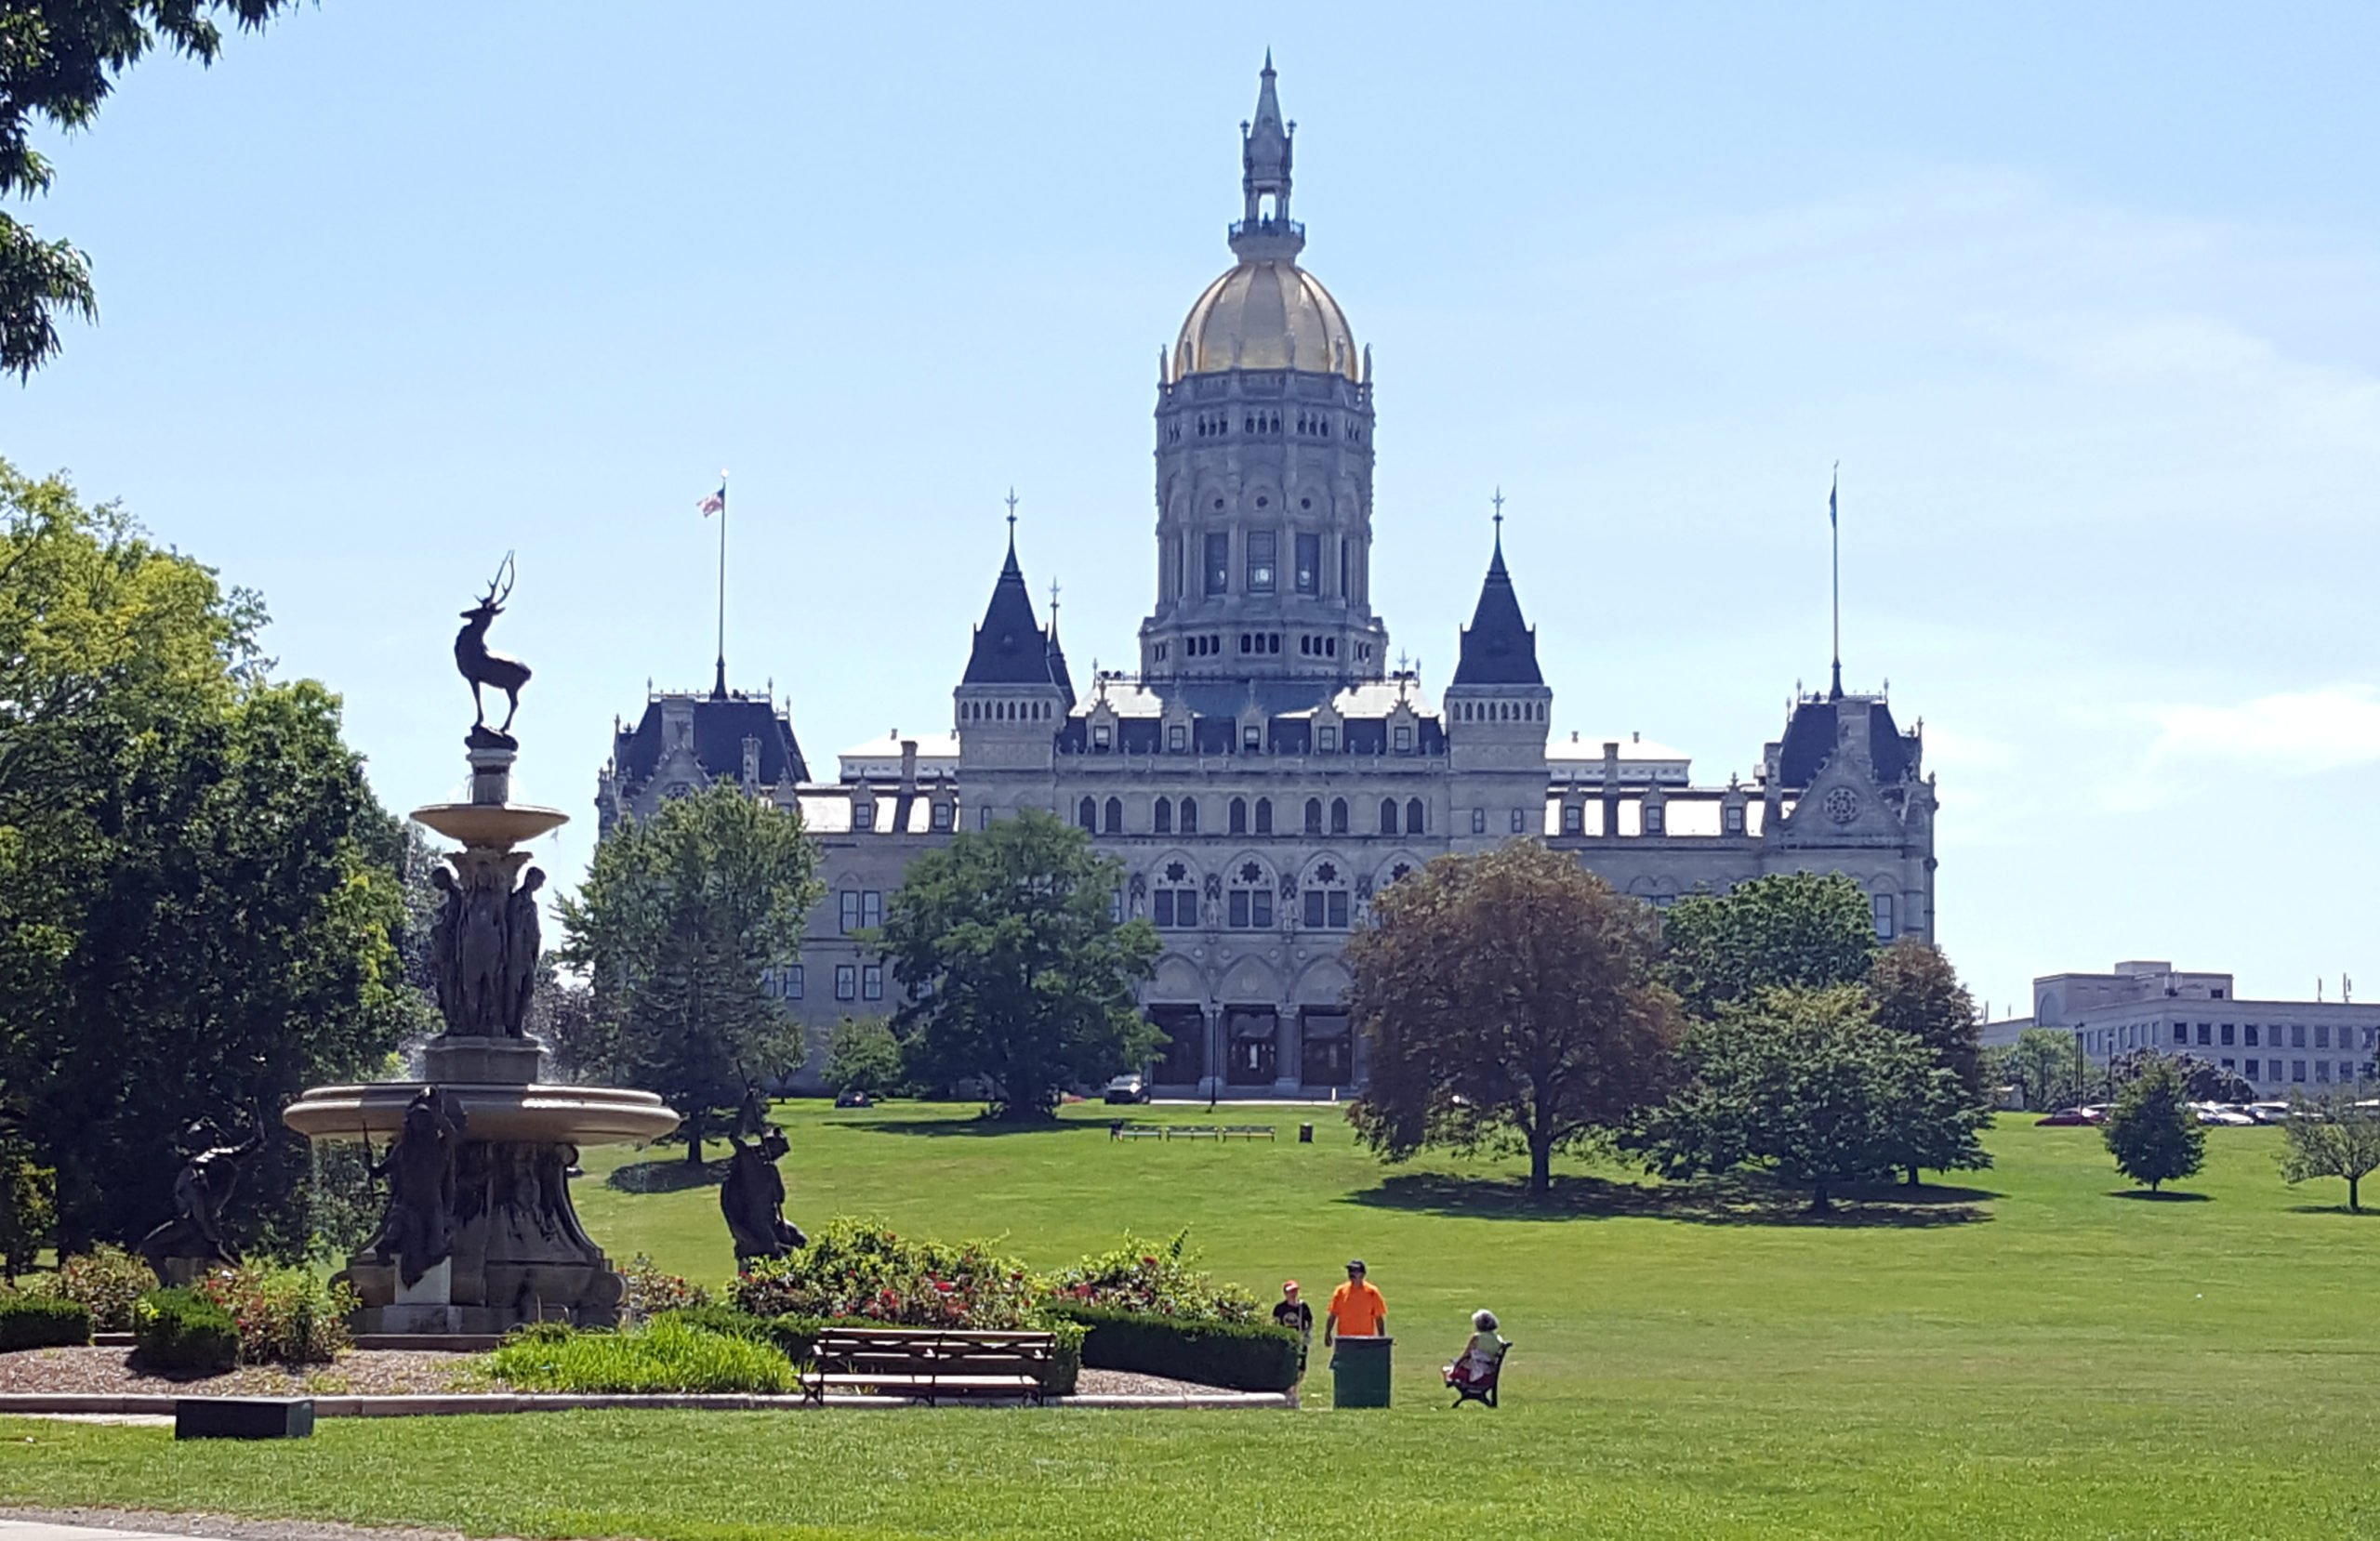 The Connecticut State Capitol pictured here in Bushnell Park, Hartford, Connecticut, U.S., August 17, 2017. Picture taken August 17, 2017. REUTERS/Hilary Russ